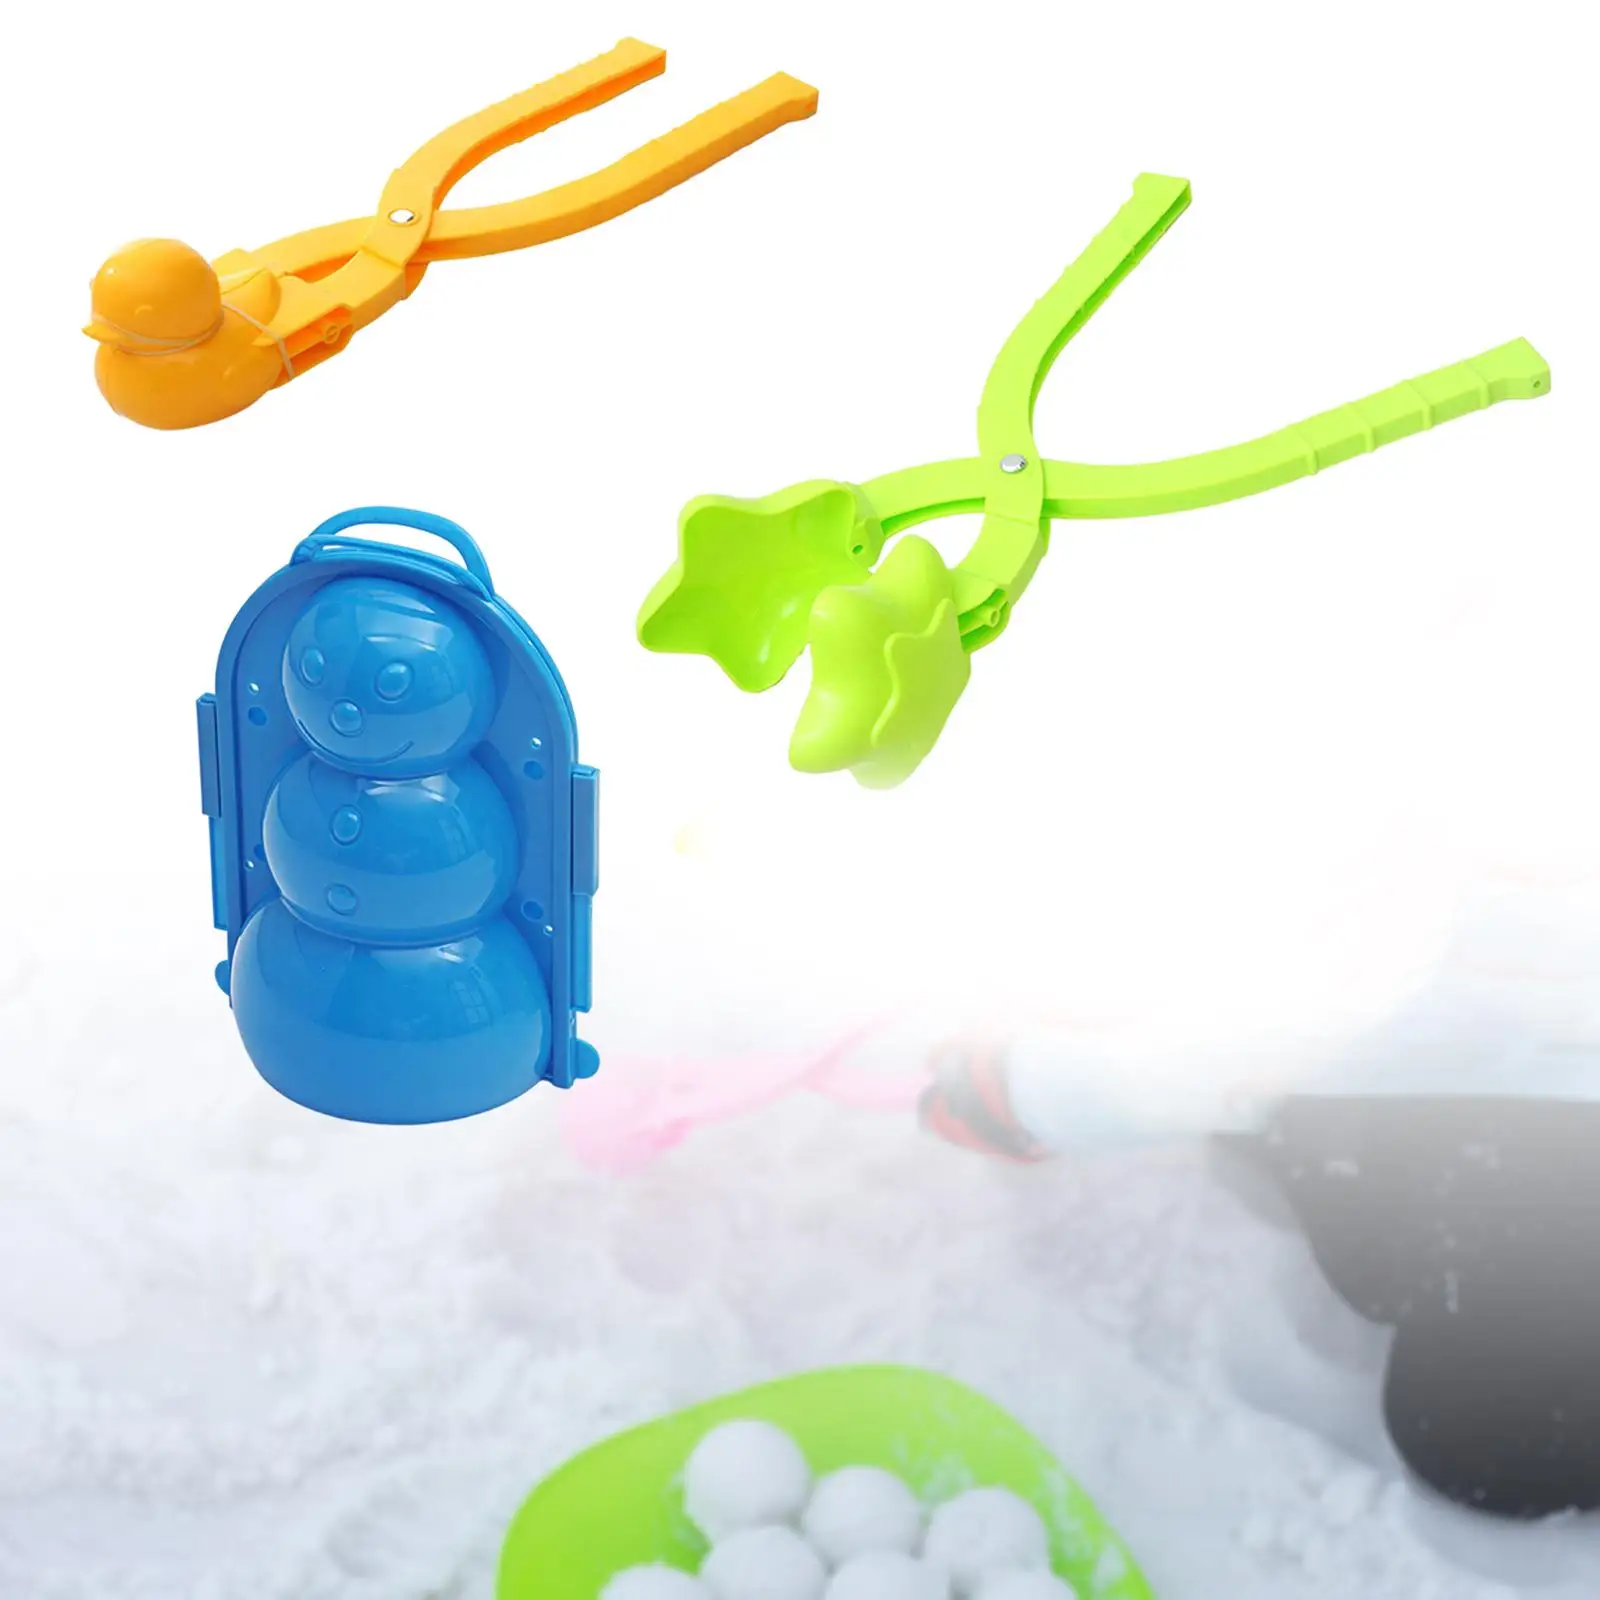 Adorable Snowball Clip Multipurpose Interactive Toy Snow Ball Making Tools for Travel Outdoor Games Holiday Girls Boys